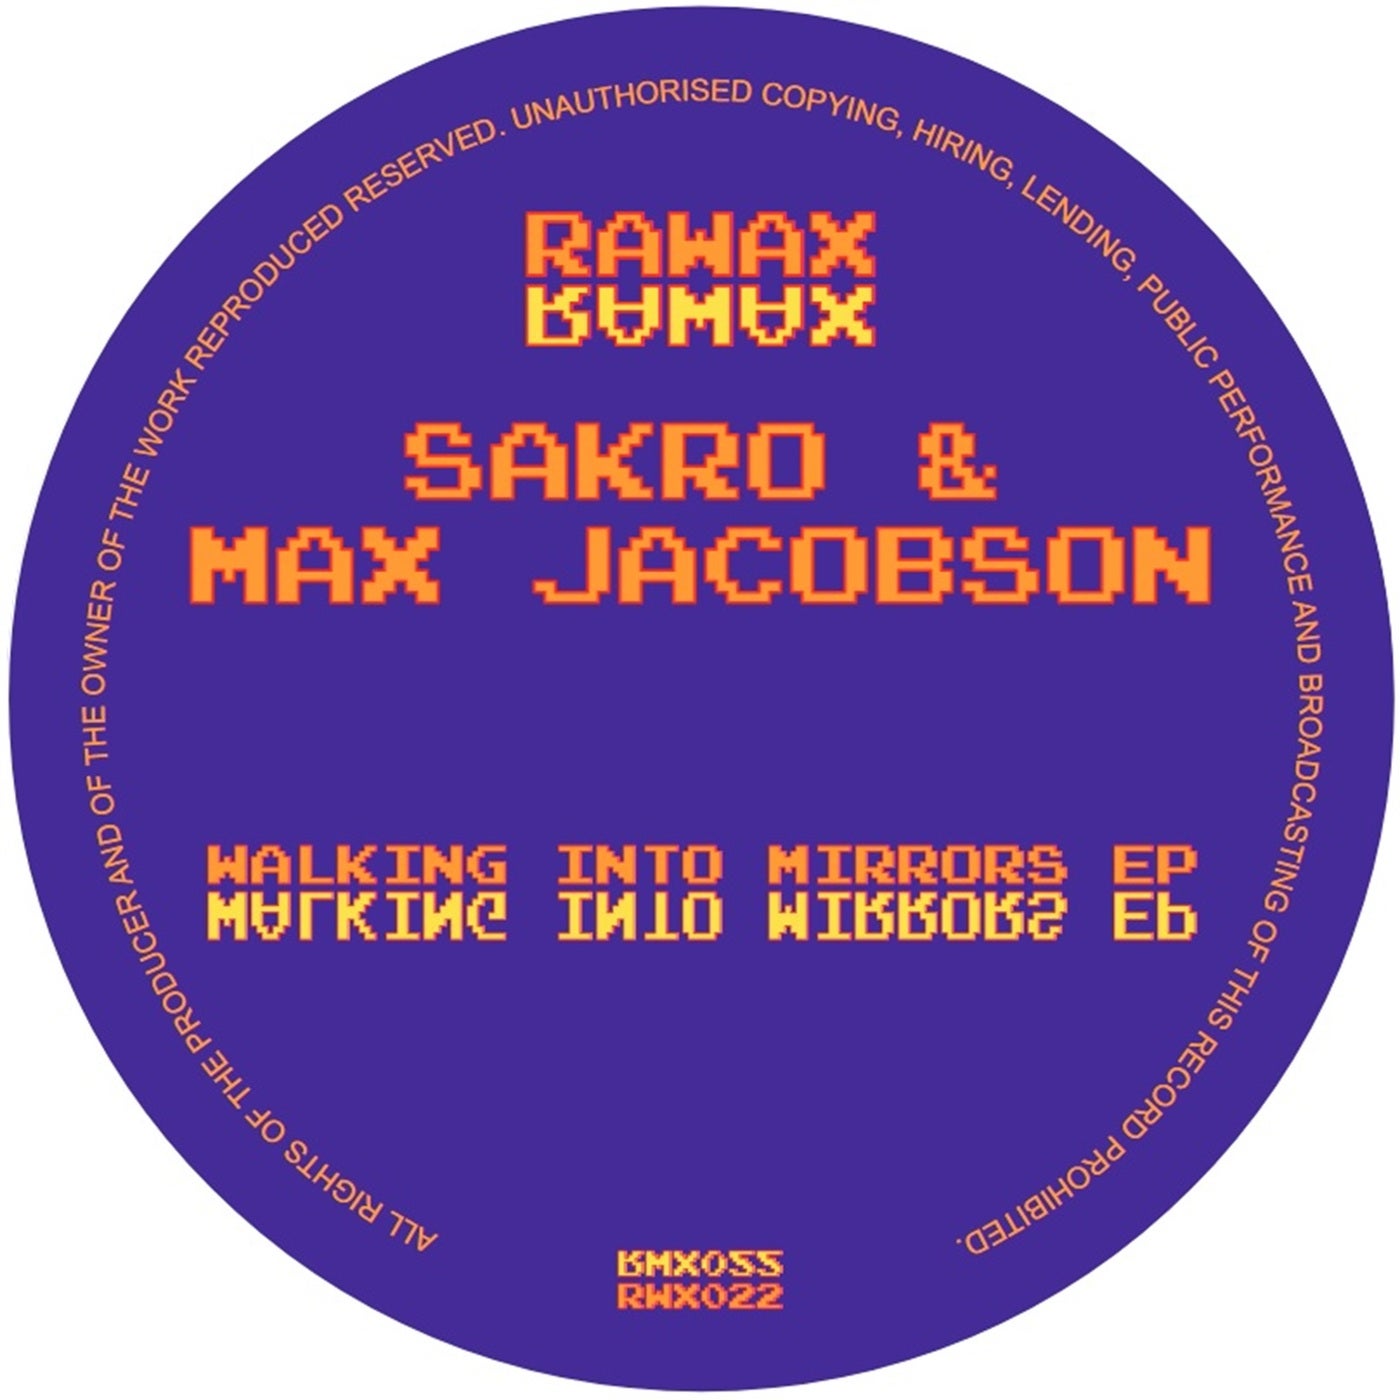 image cover: Max Jacobson, Sakro - Walking Into Mirrors EP on Rawax